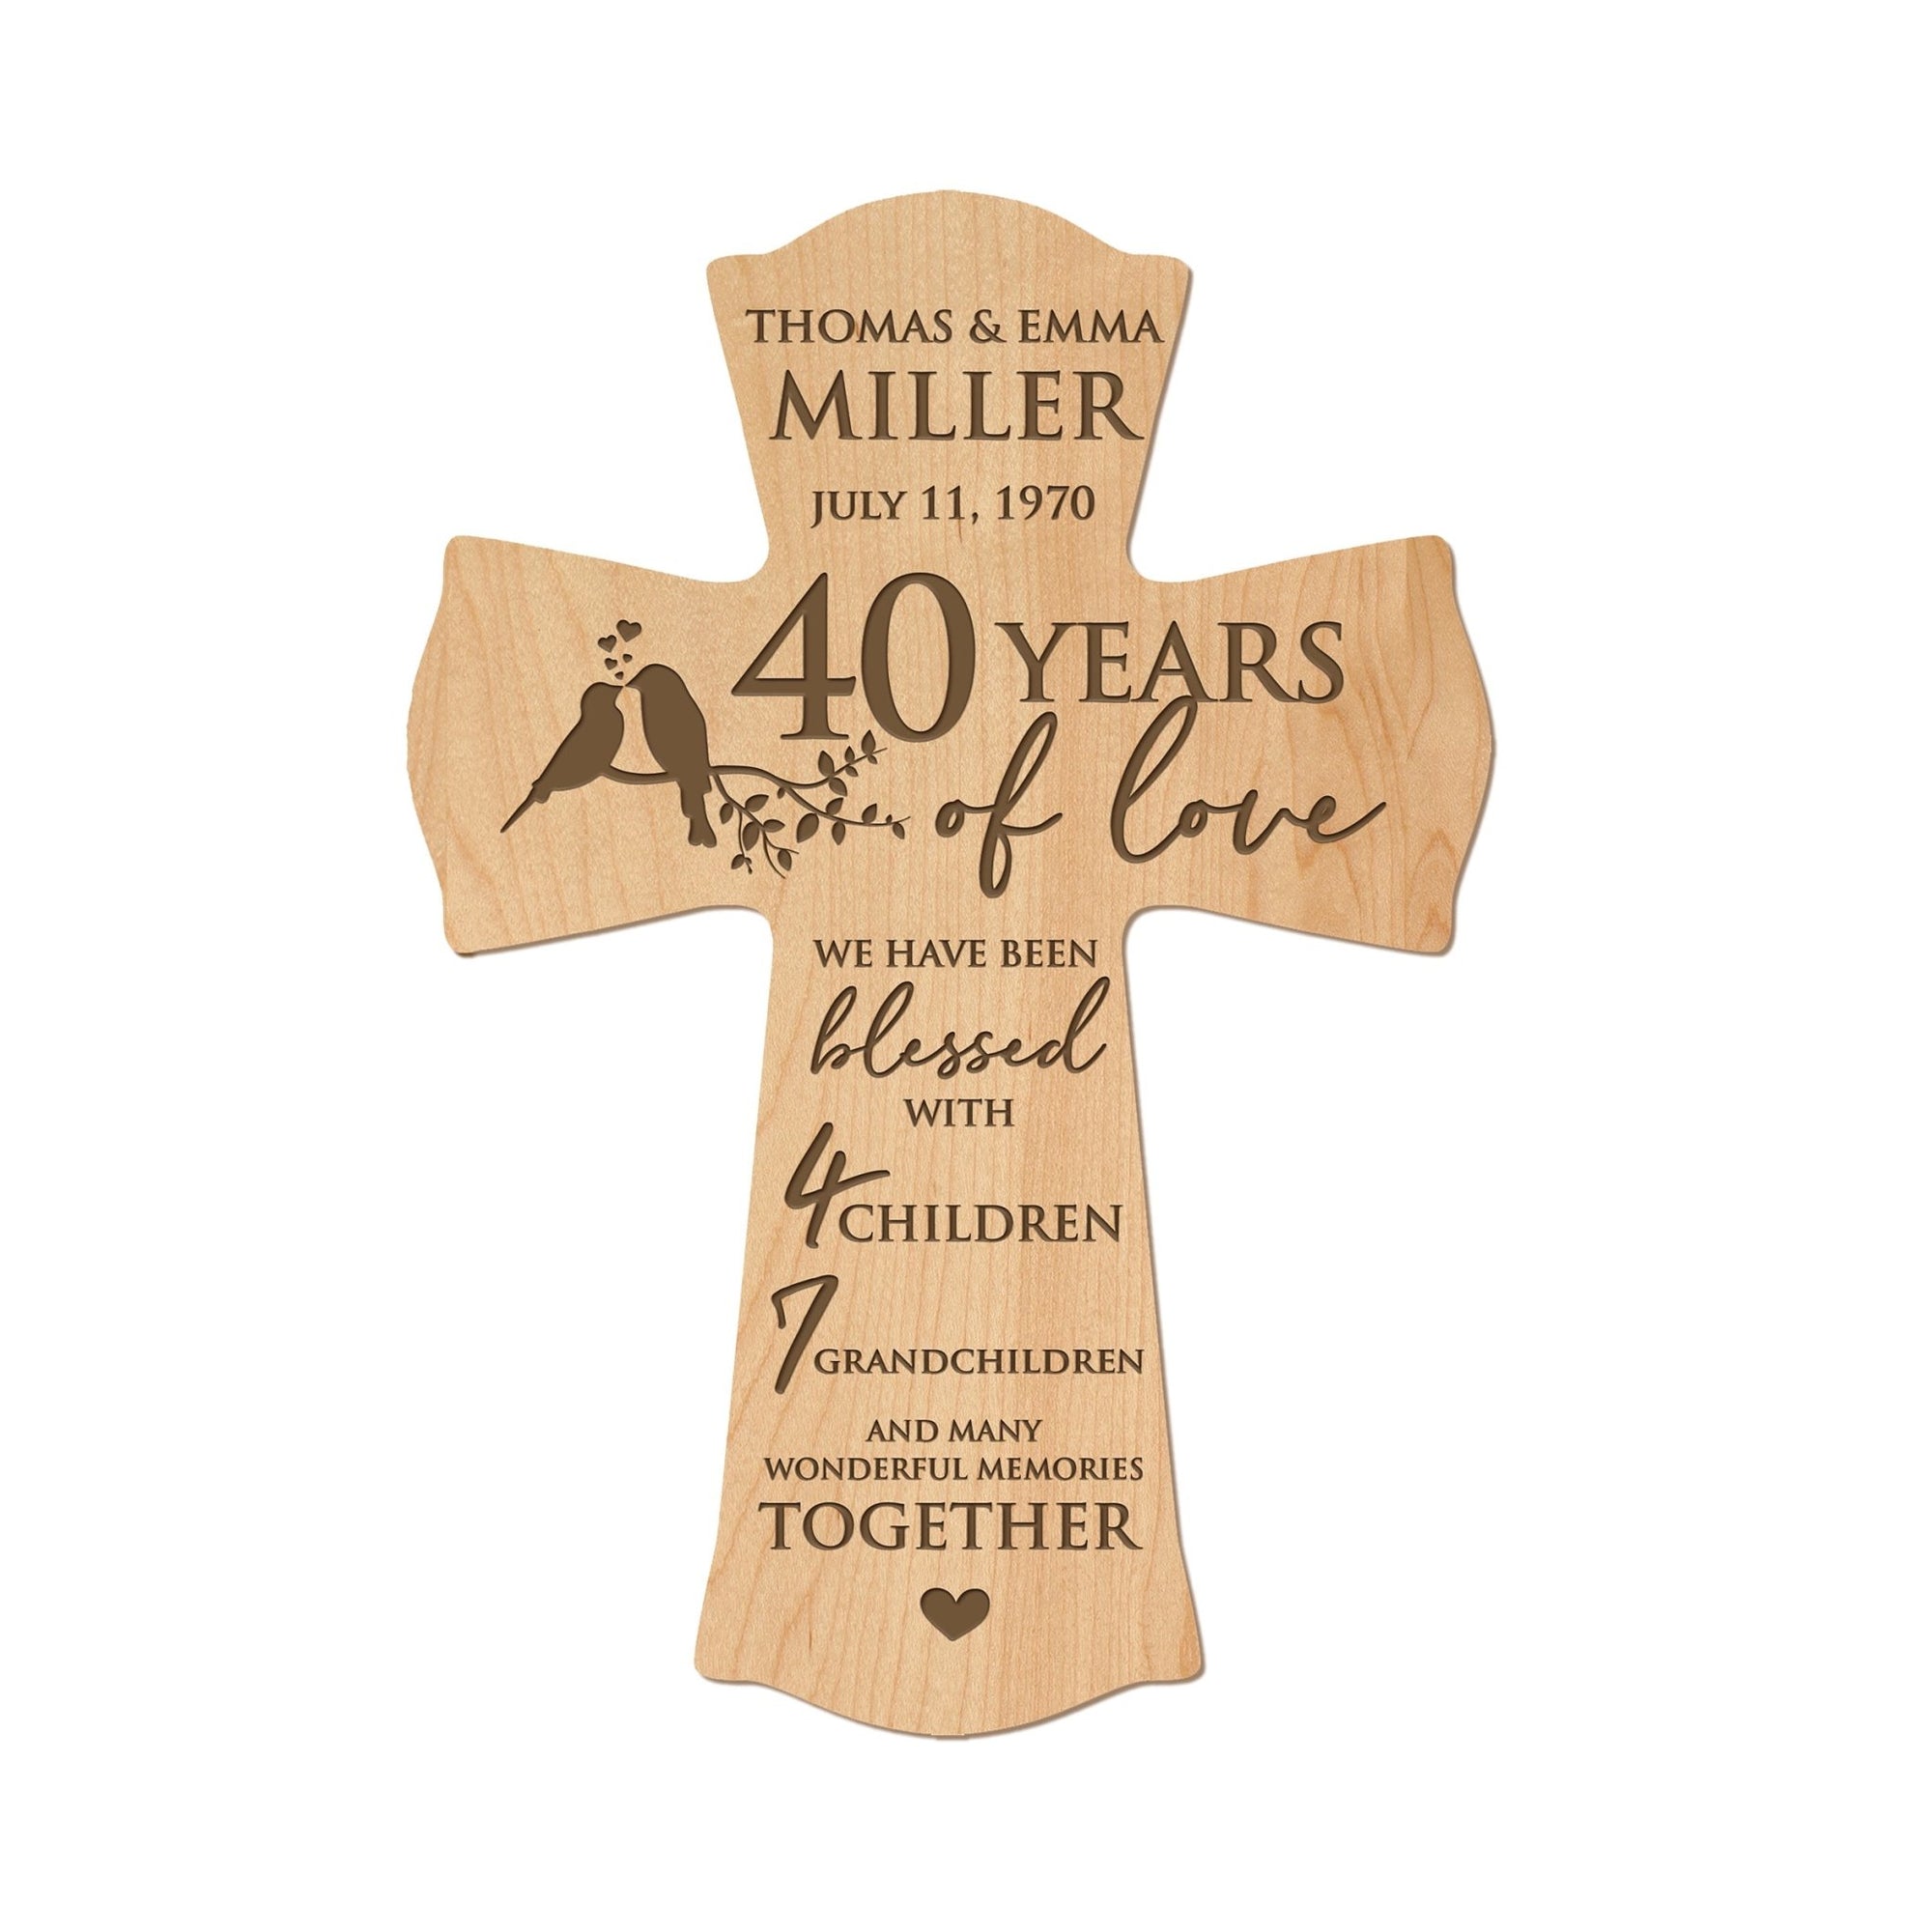 Custom Wedding Anniversary Gift Ideas - Personalized Wall Cross for a Memorable 40th Celebration